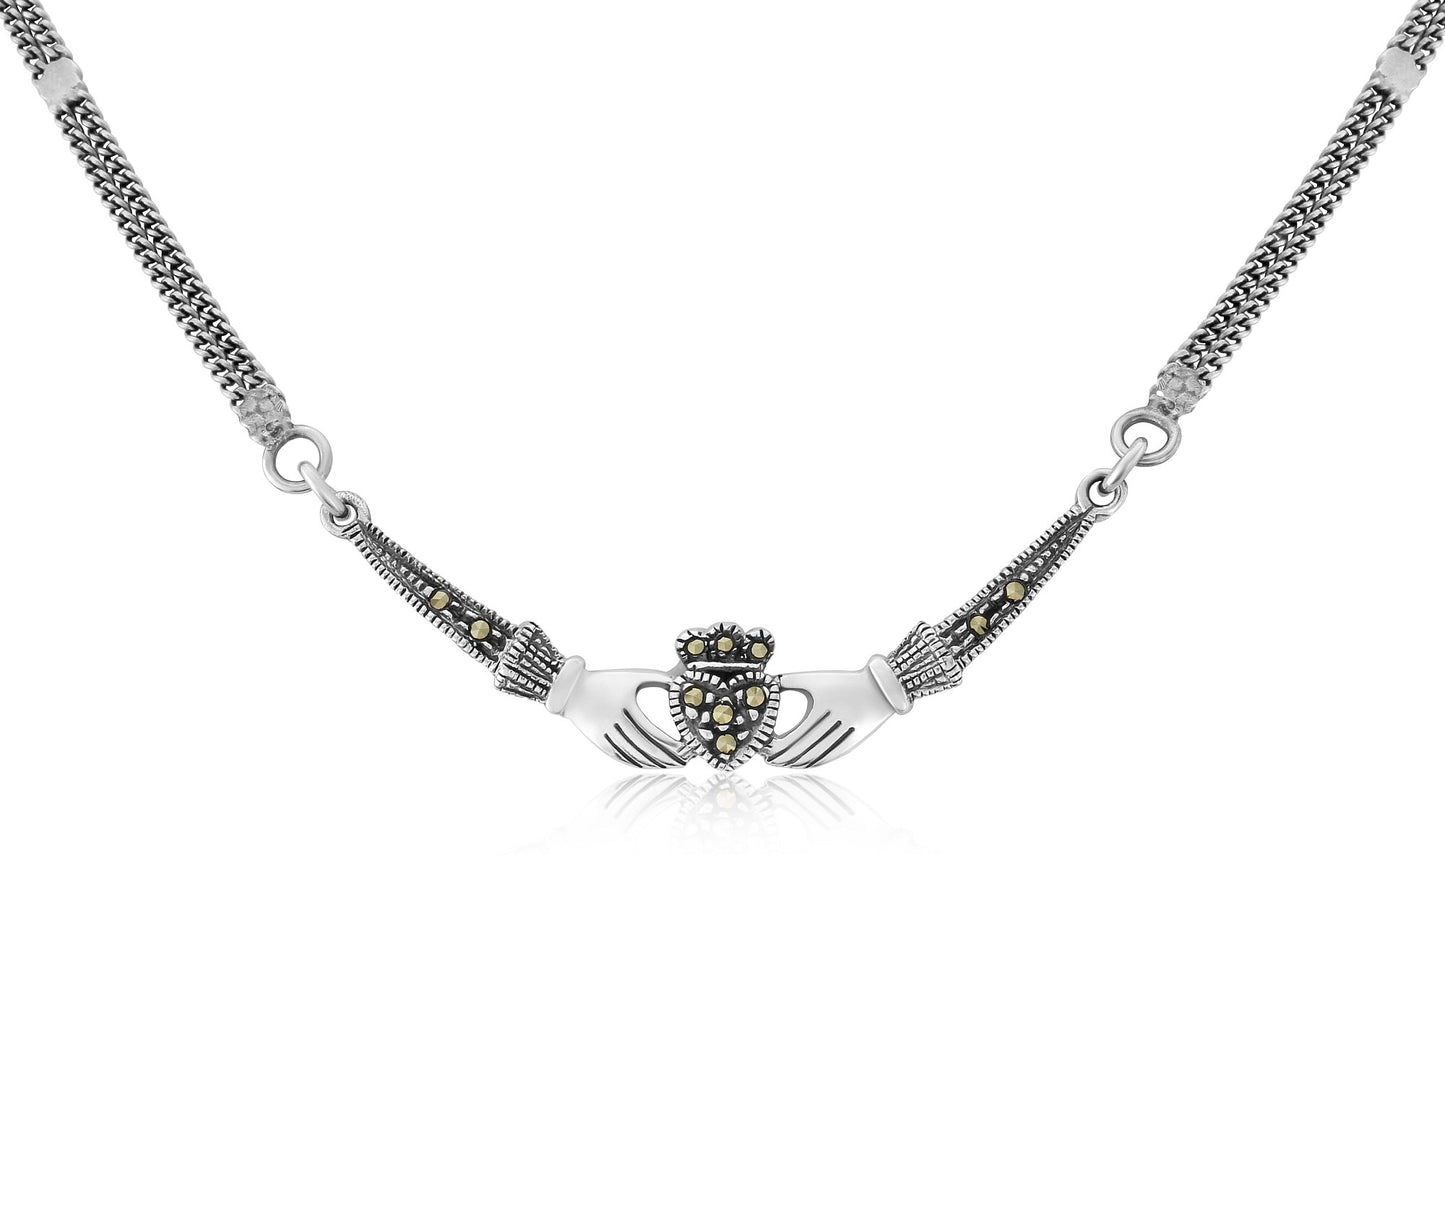 Claddagh Sterling Silver and Marcasite Necklace